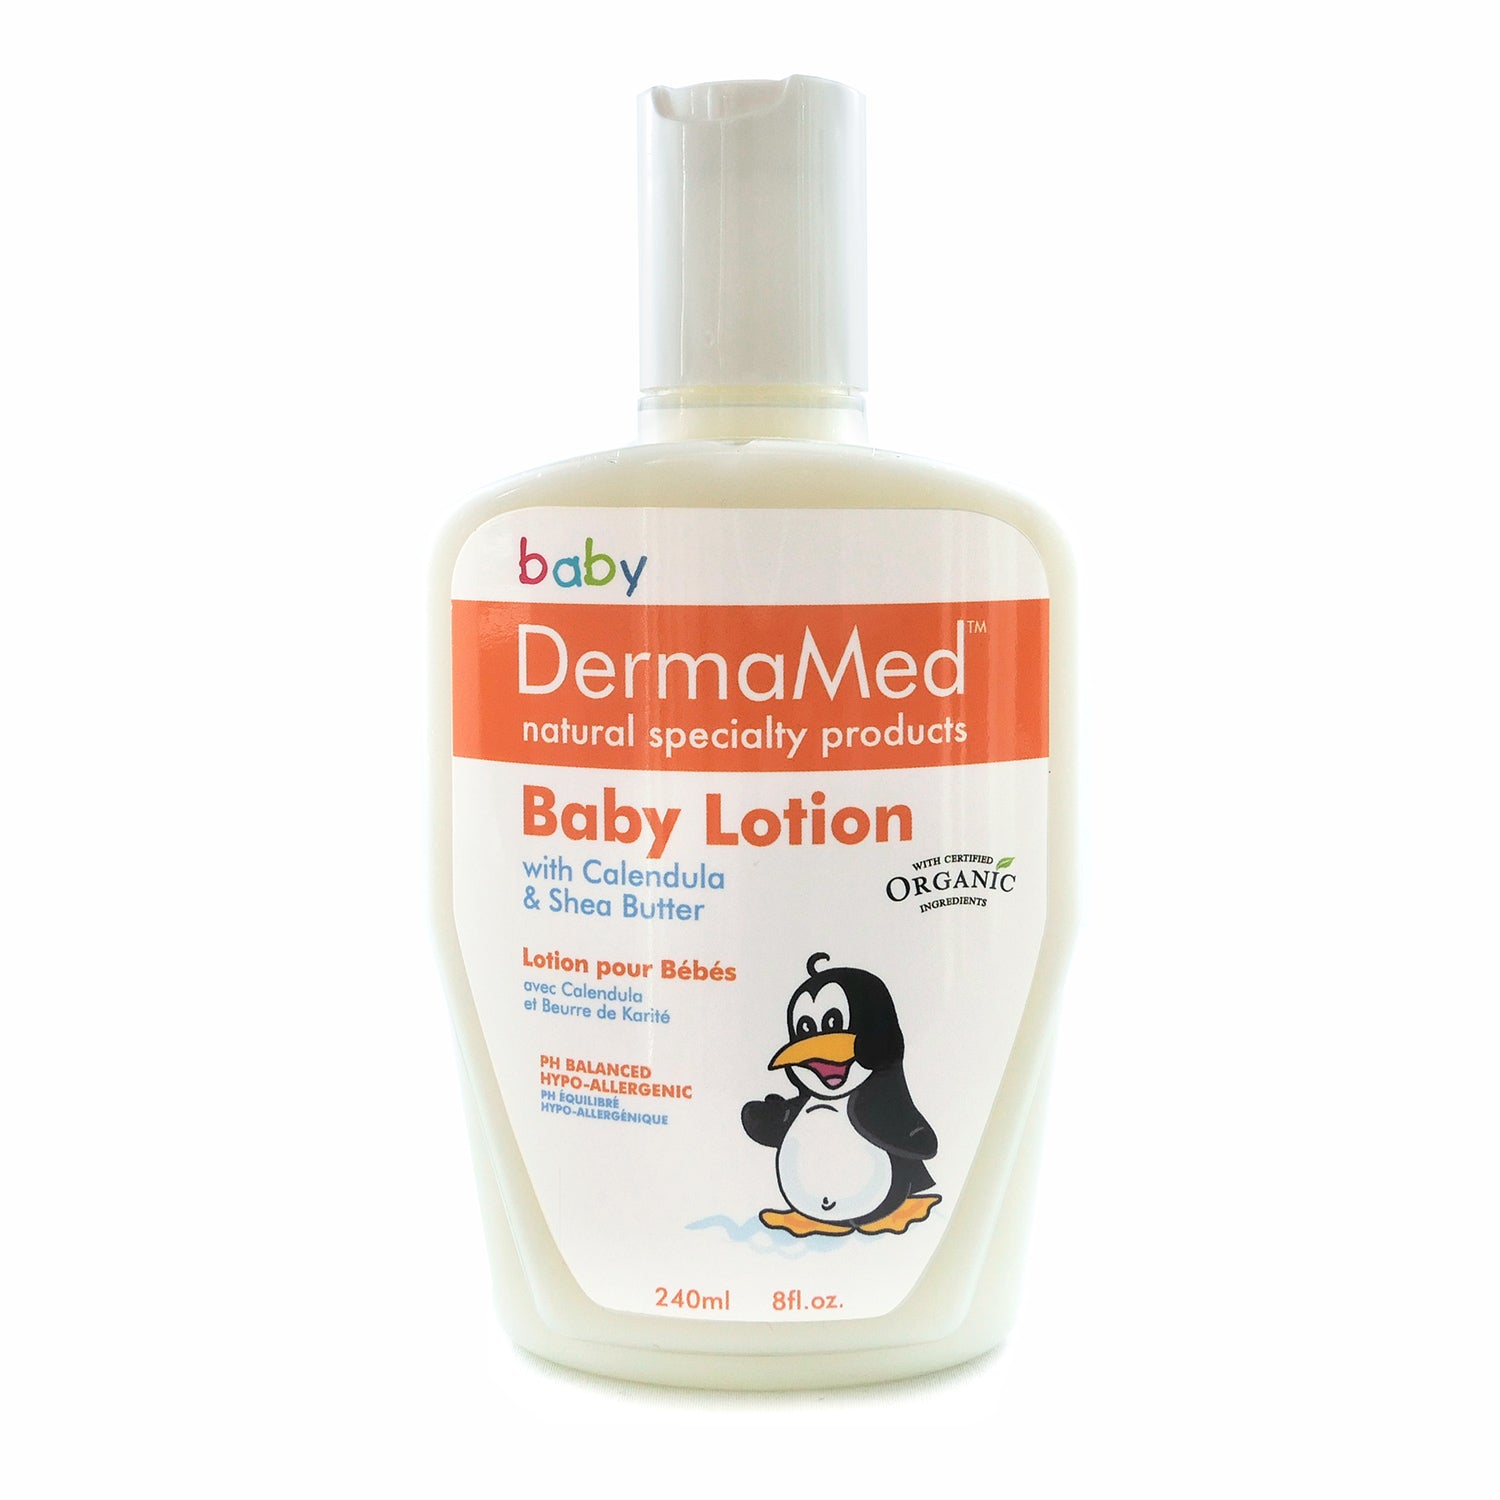 Baby Lotion - Dermamed Pharmaceutical